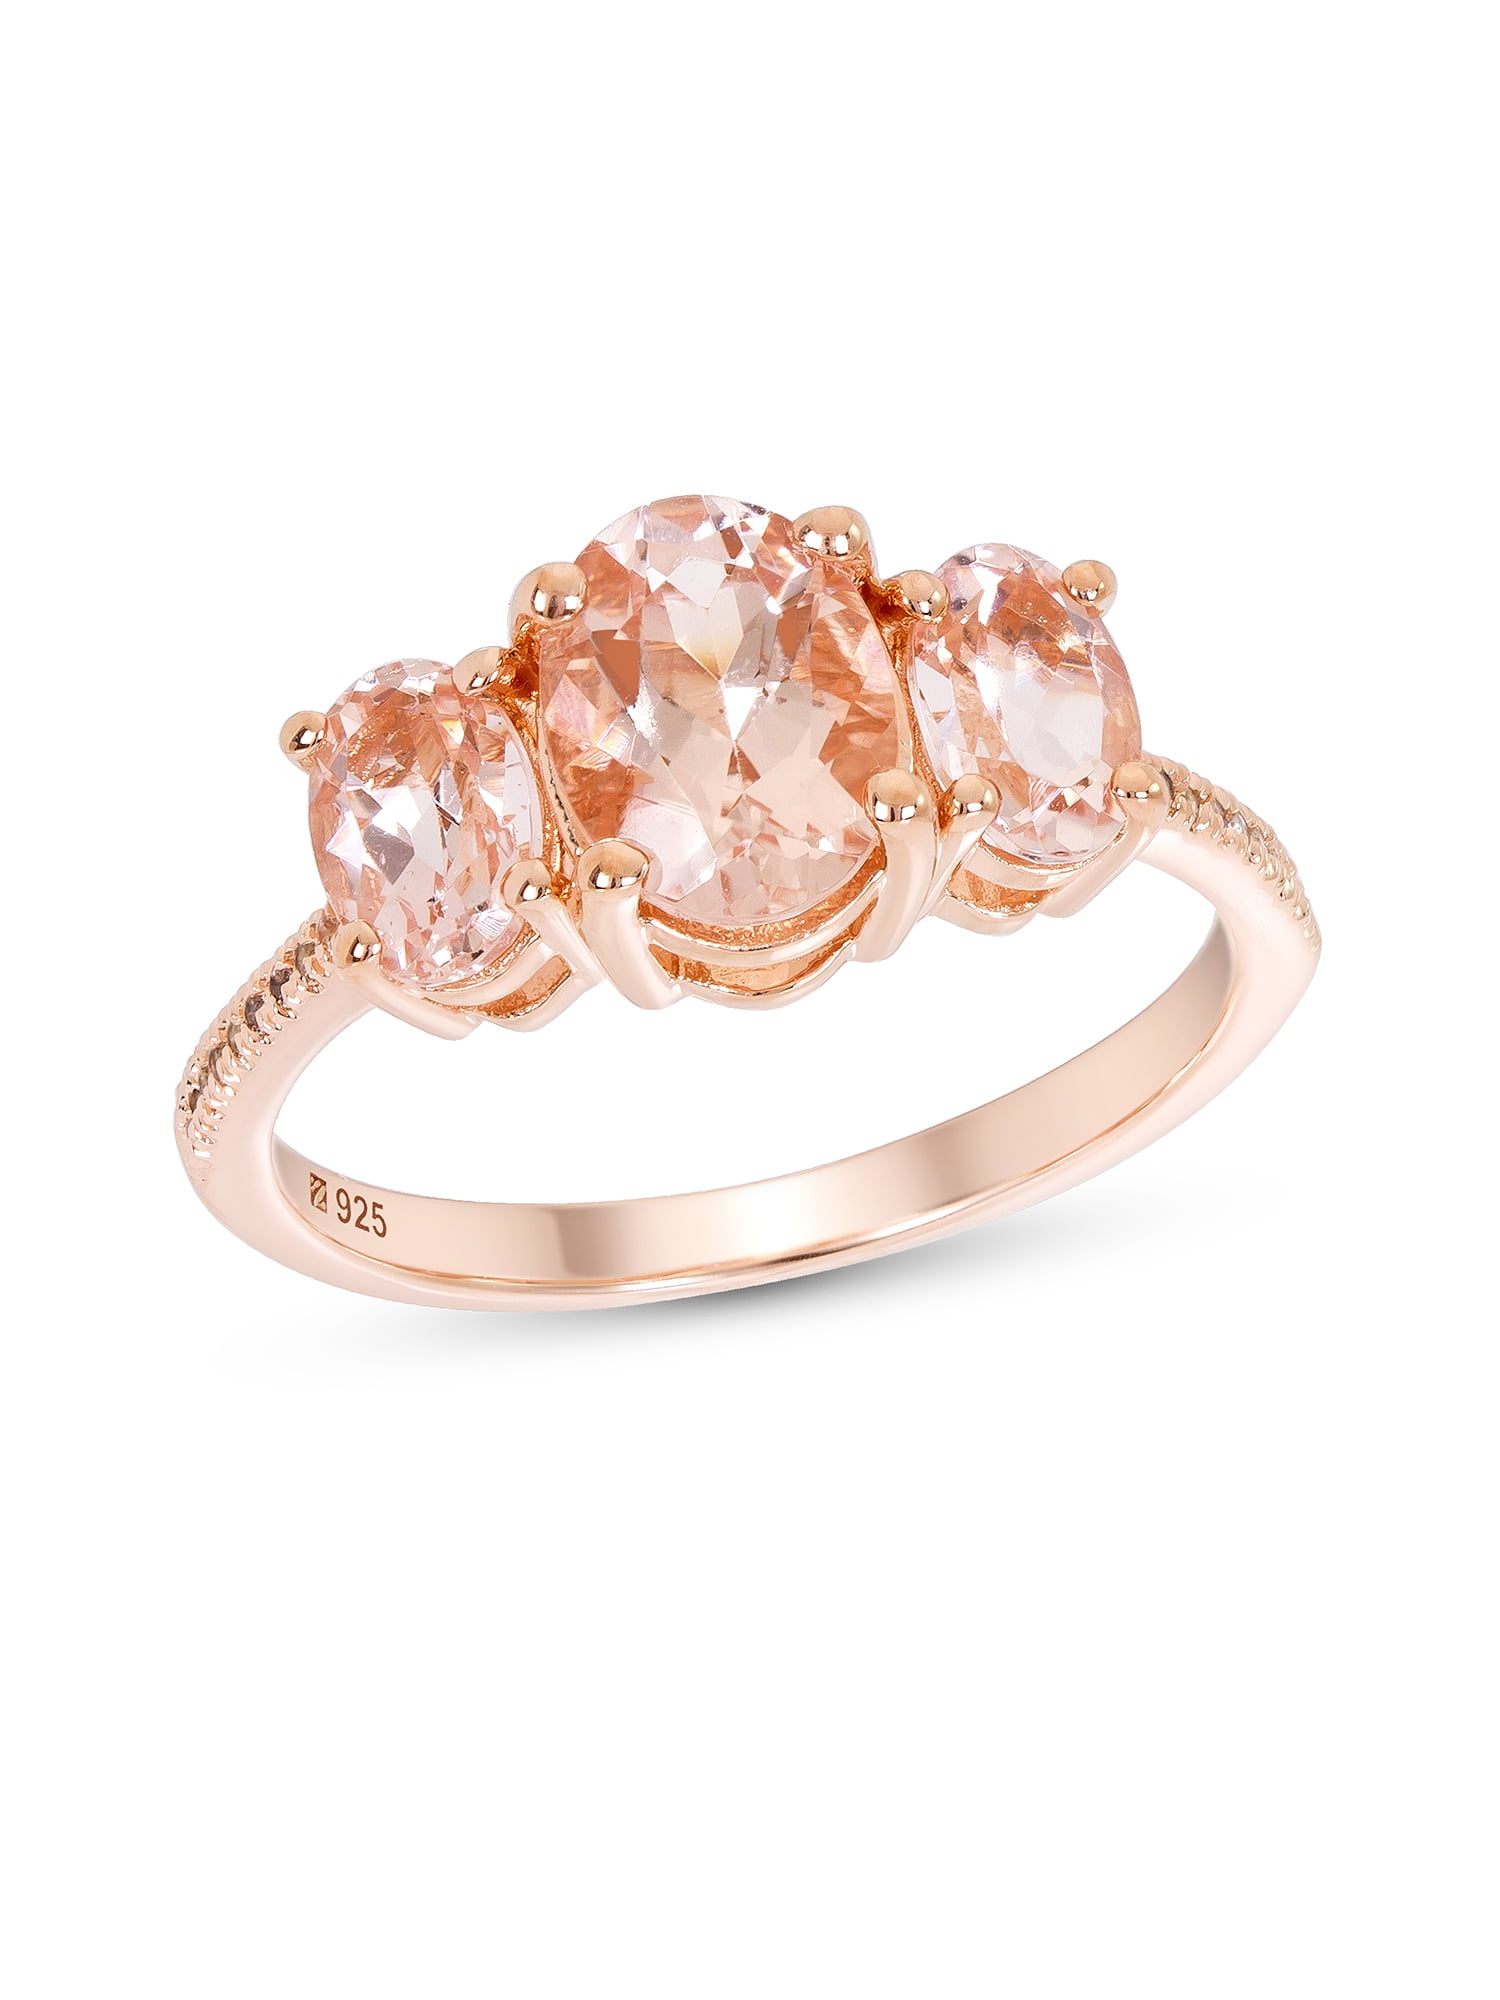 14 Karat Gold-Plated Sterling Silver 3-Stone Oval Treated Morganite ...